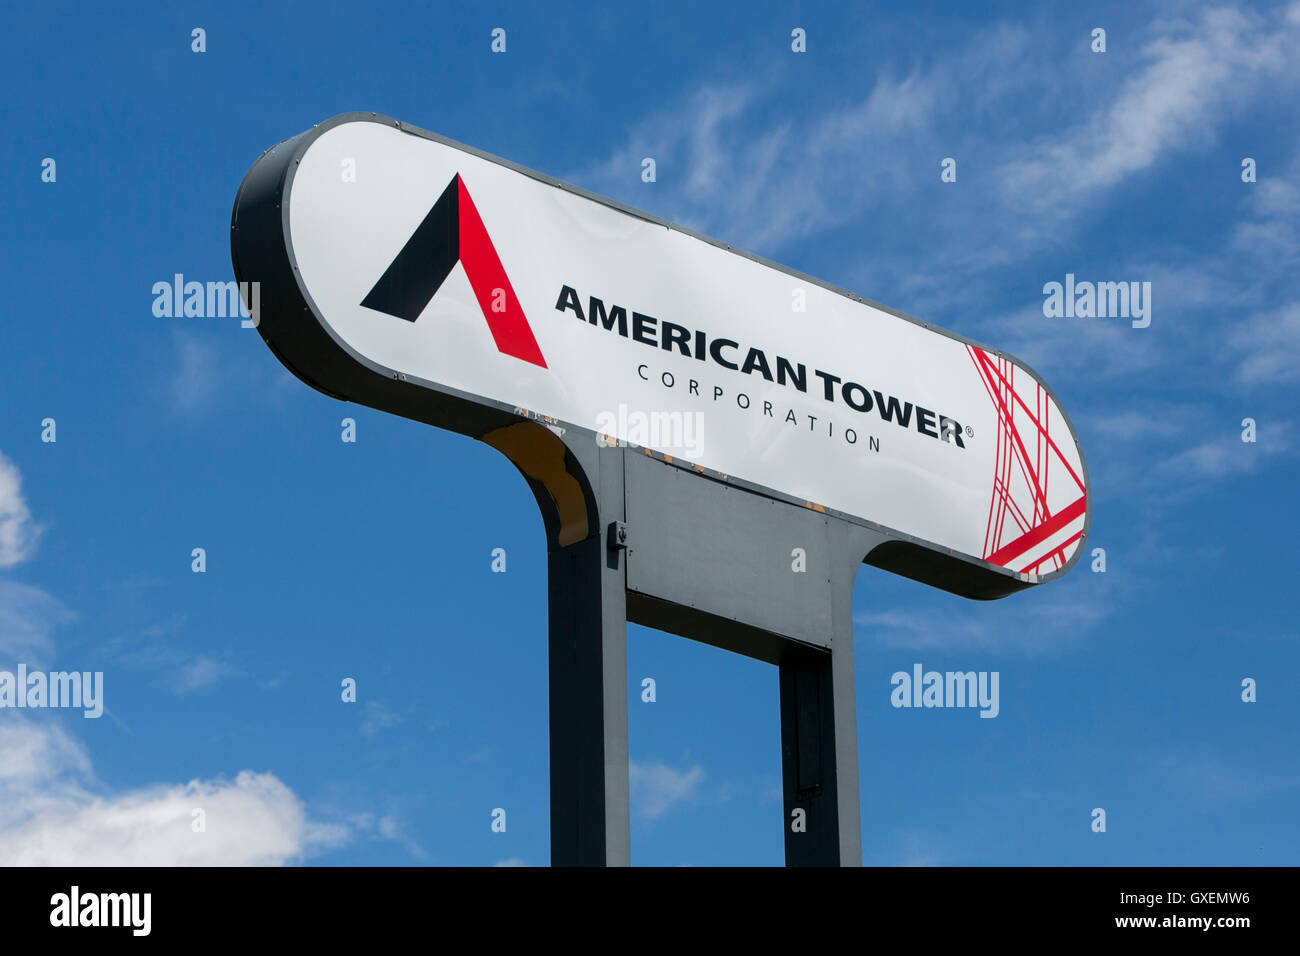 A logo sign outside of a facility occupied by the American Tower Corporation in Woburn, Massachusetts on August 14, 2016. Stock Photo